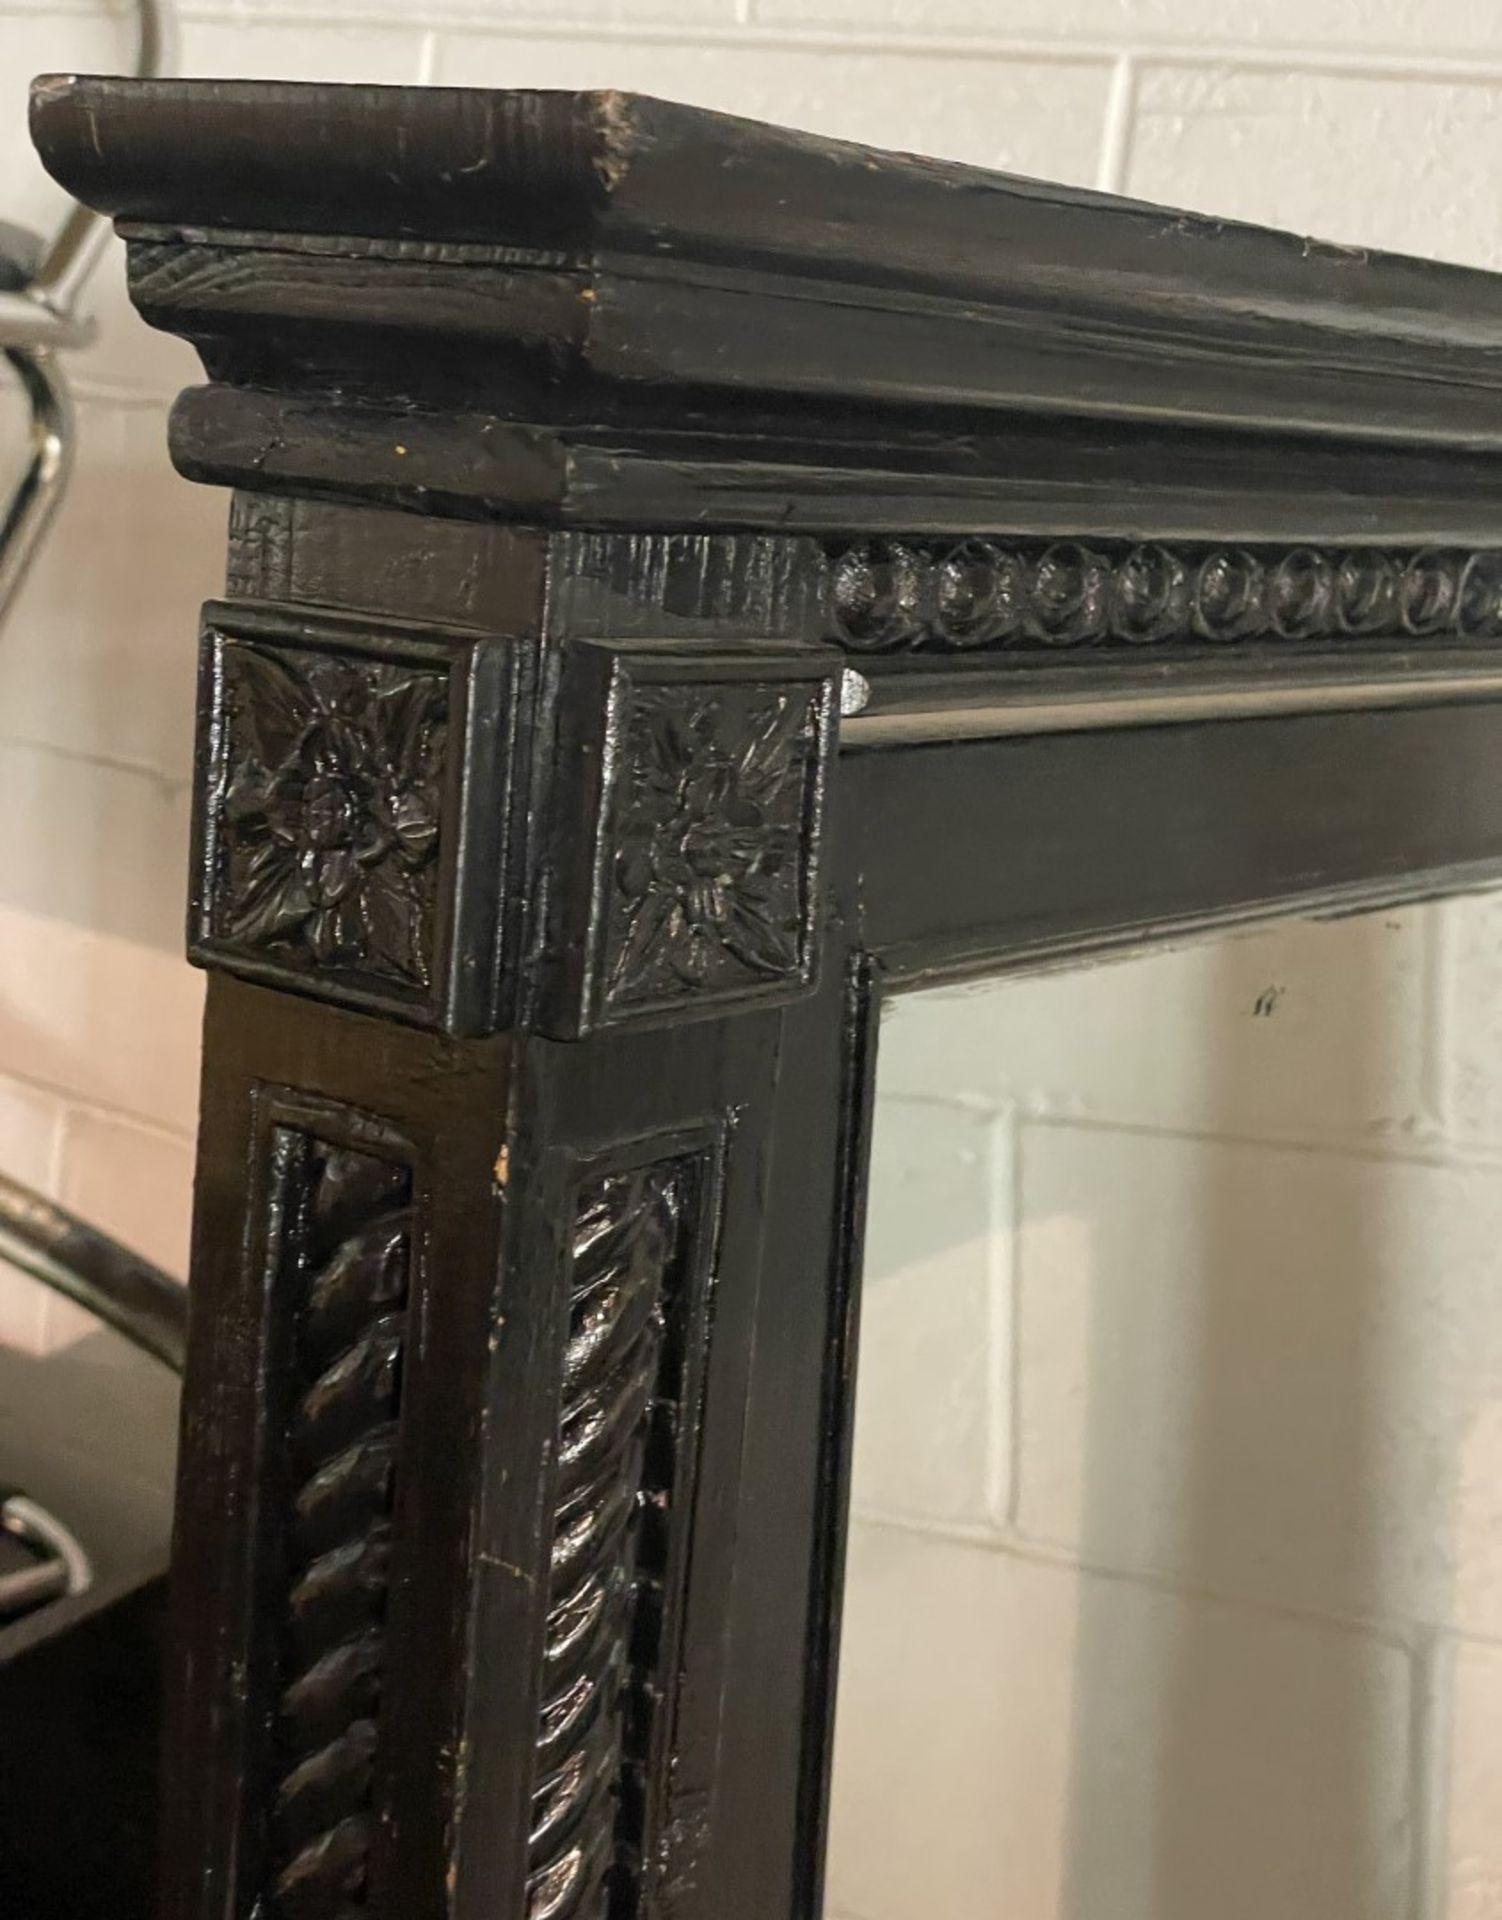 1 x Large Old Jacobean Style Floor Standing Black Mirror With Wonderful Detail - Approx 85x168Cm - - Image 9 of 14